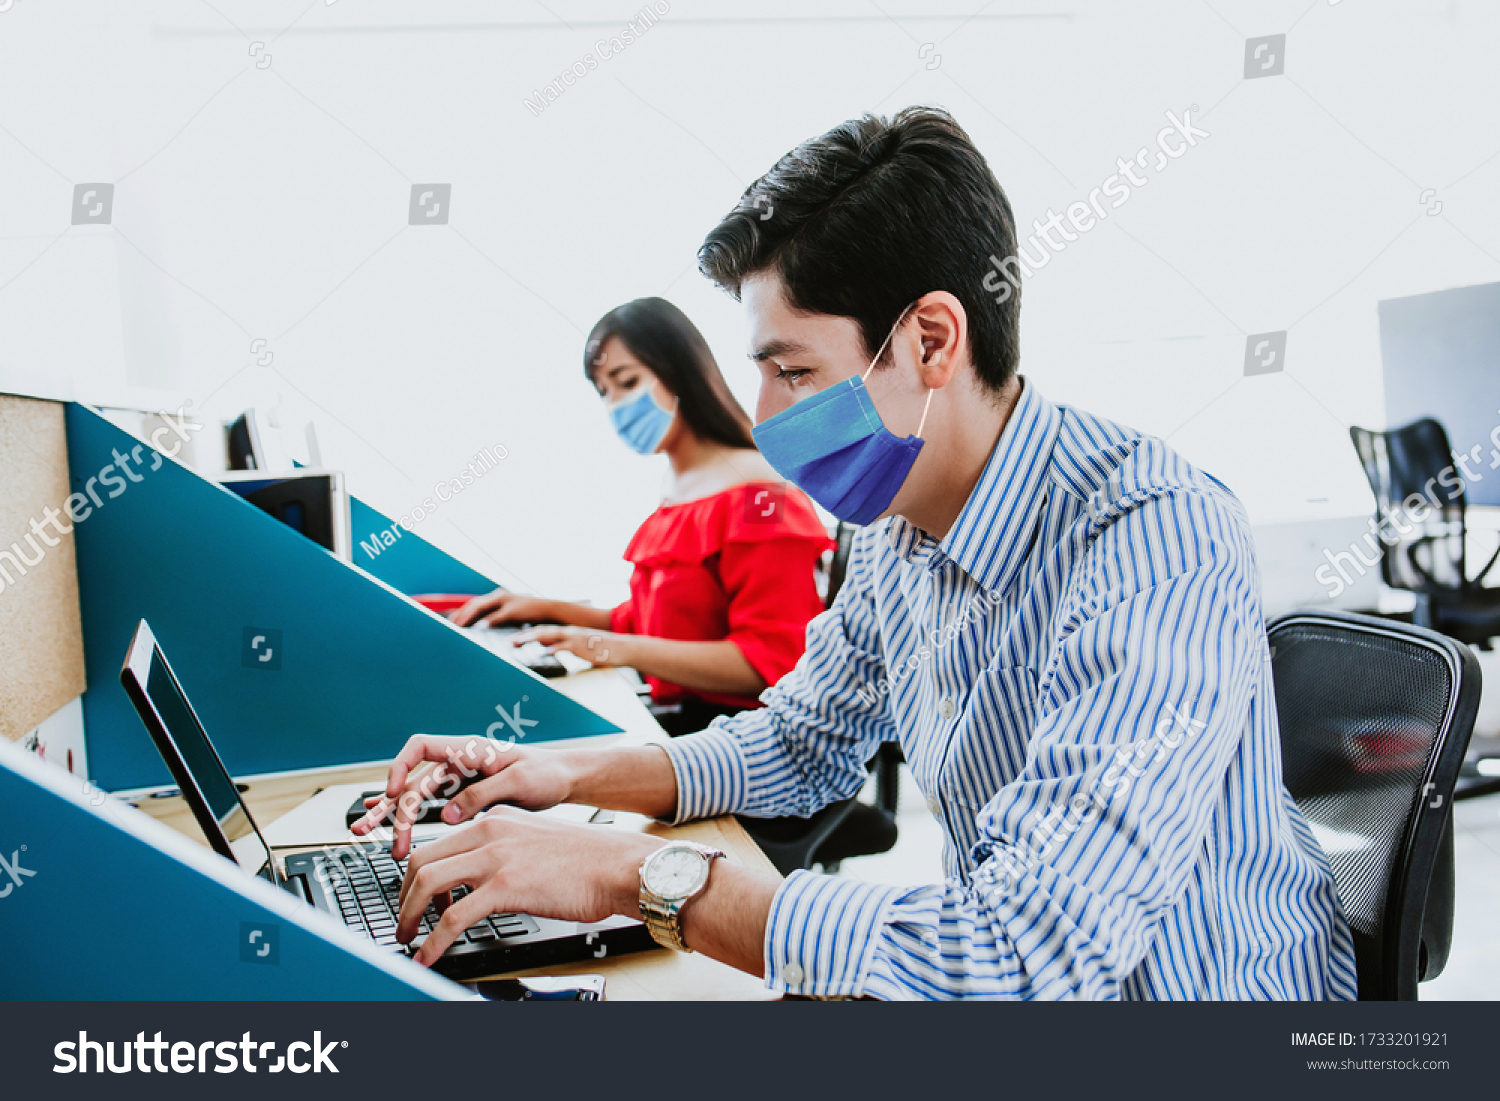 Latin People working in business office wearing medical face mask for social distancing in new normal situation protecting and preventing the infection of corona virus or covid-19 in Latin America  #1733201921